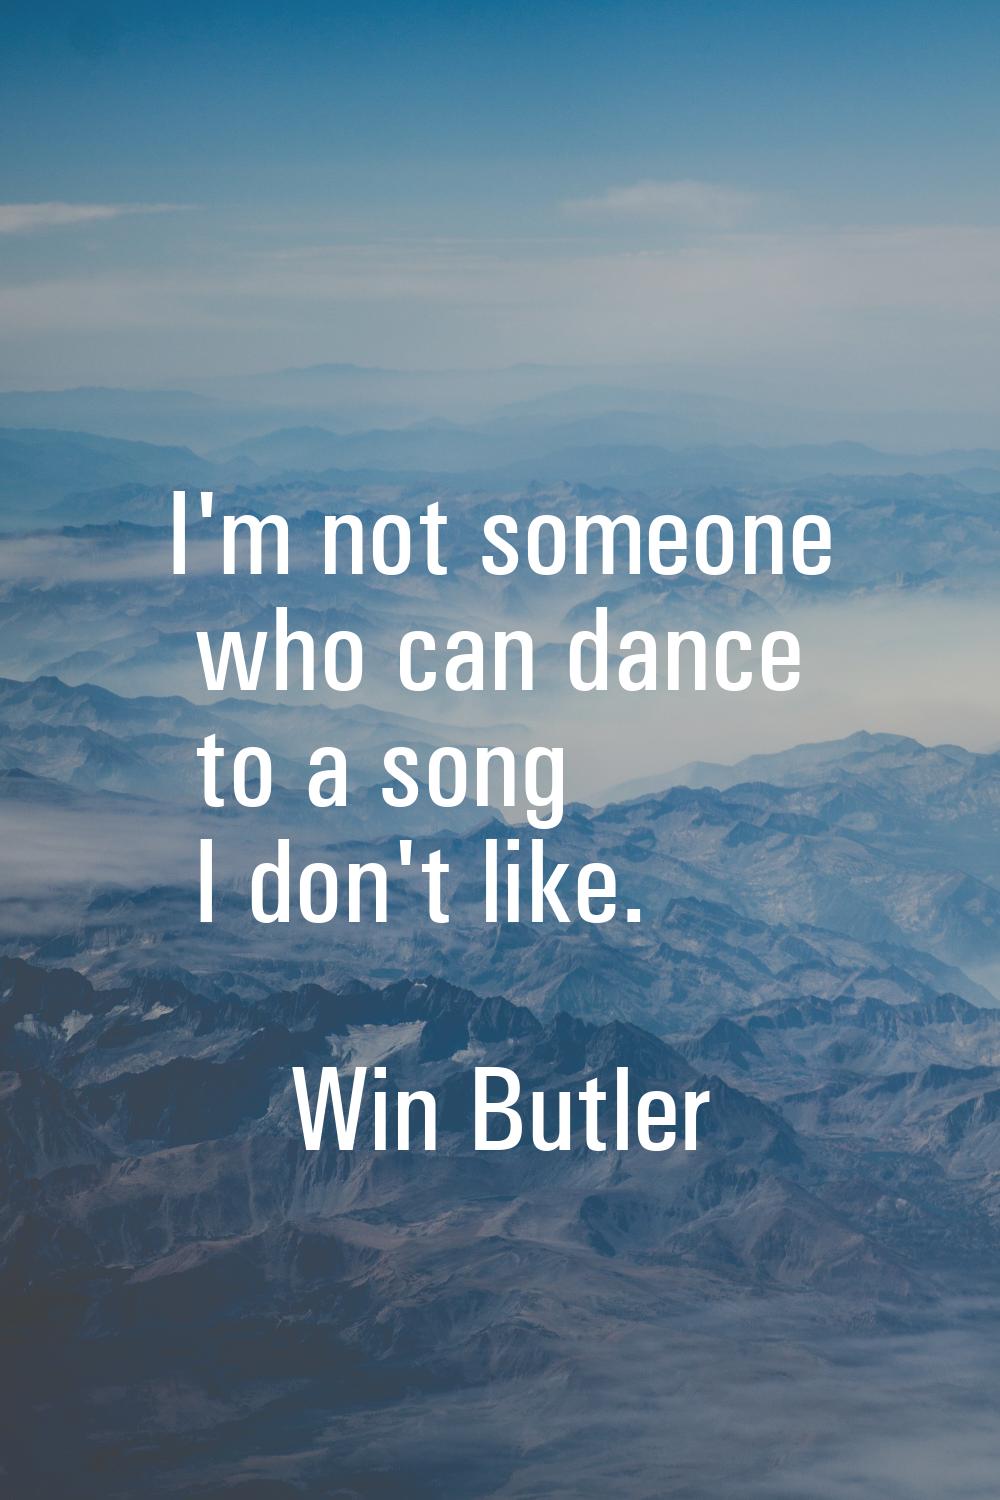 I'm not someone who can dance to a song I don't like.